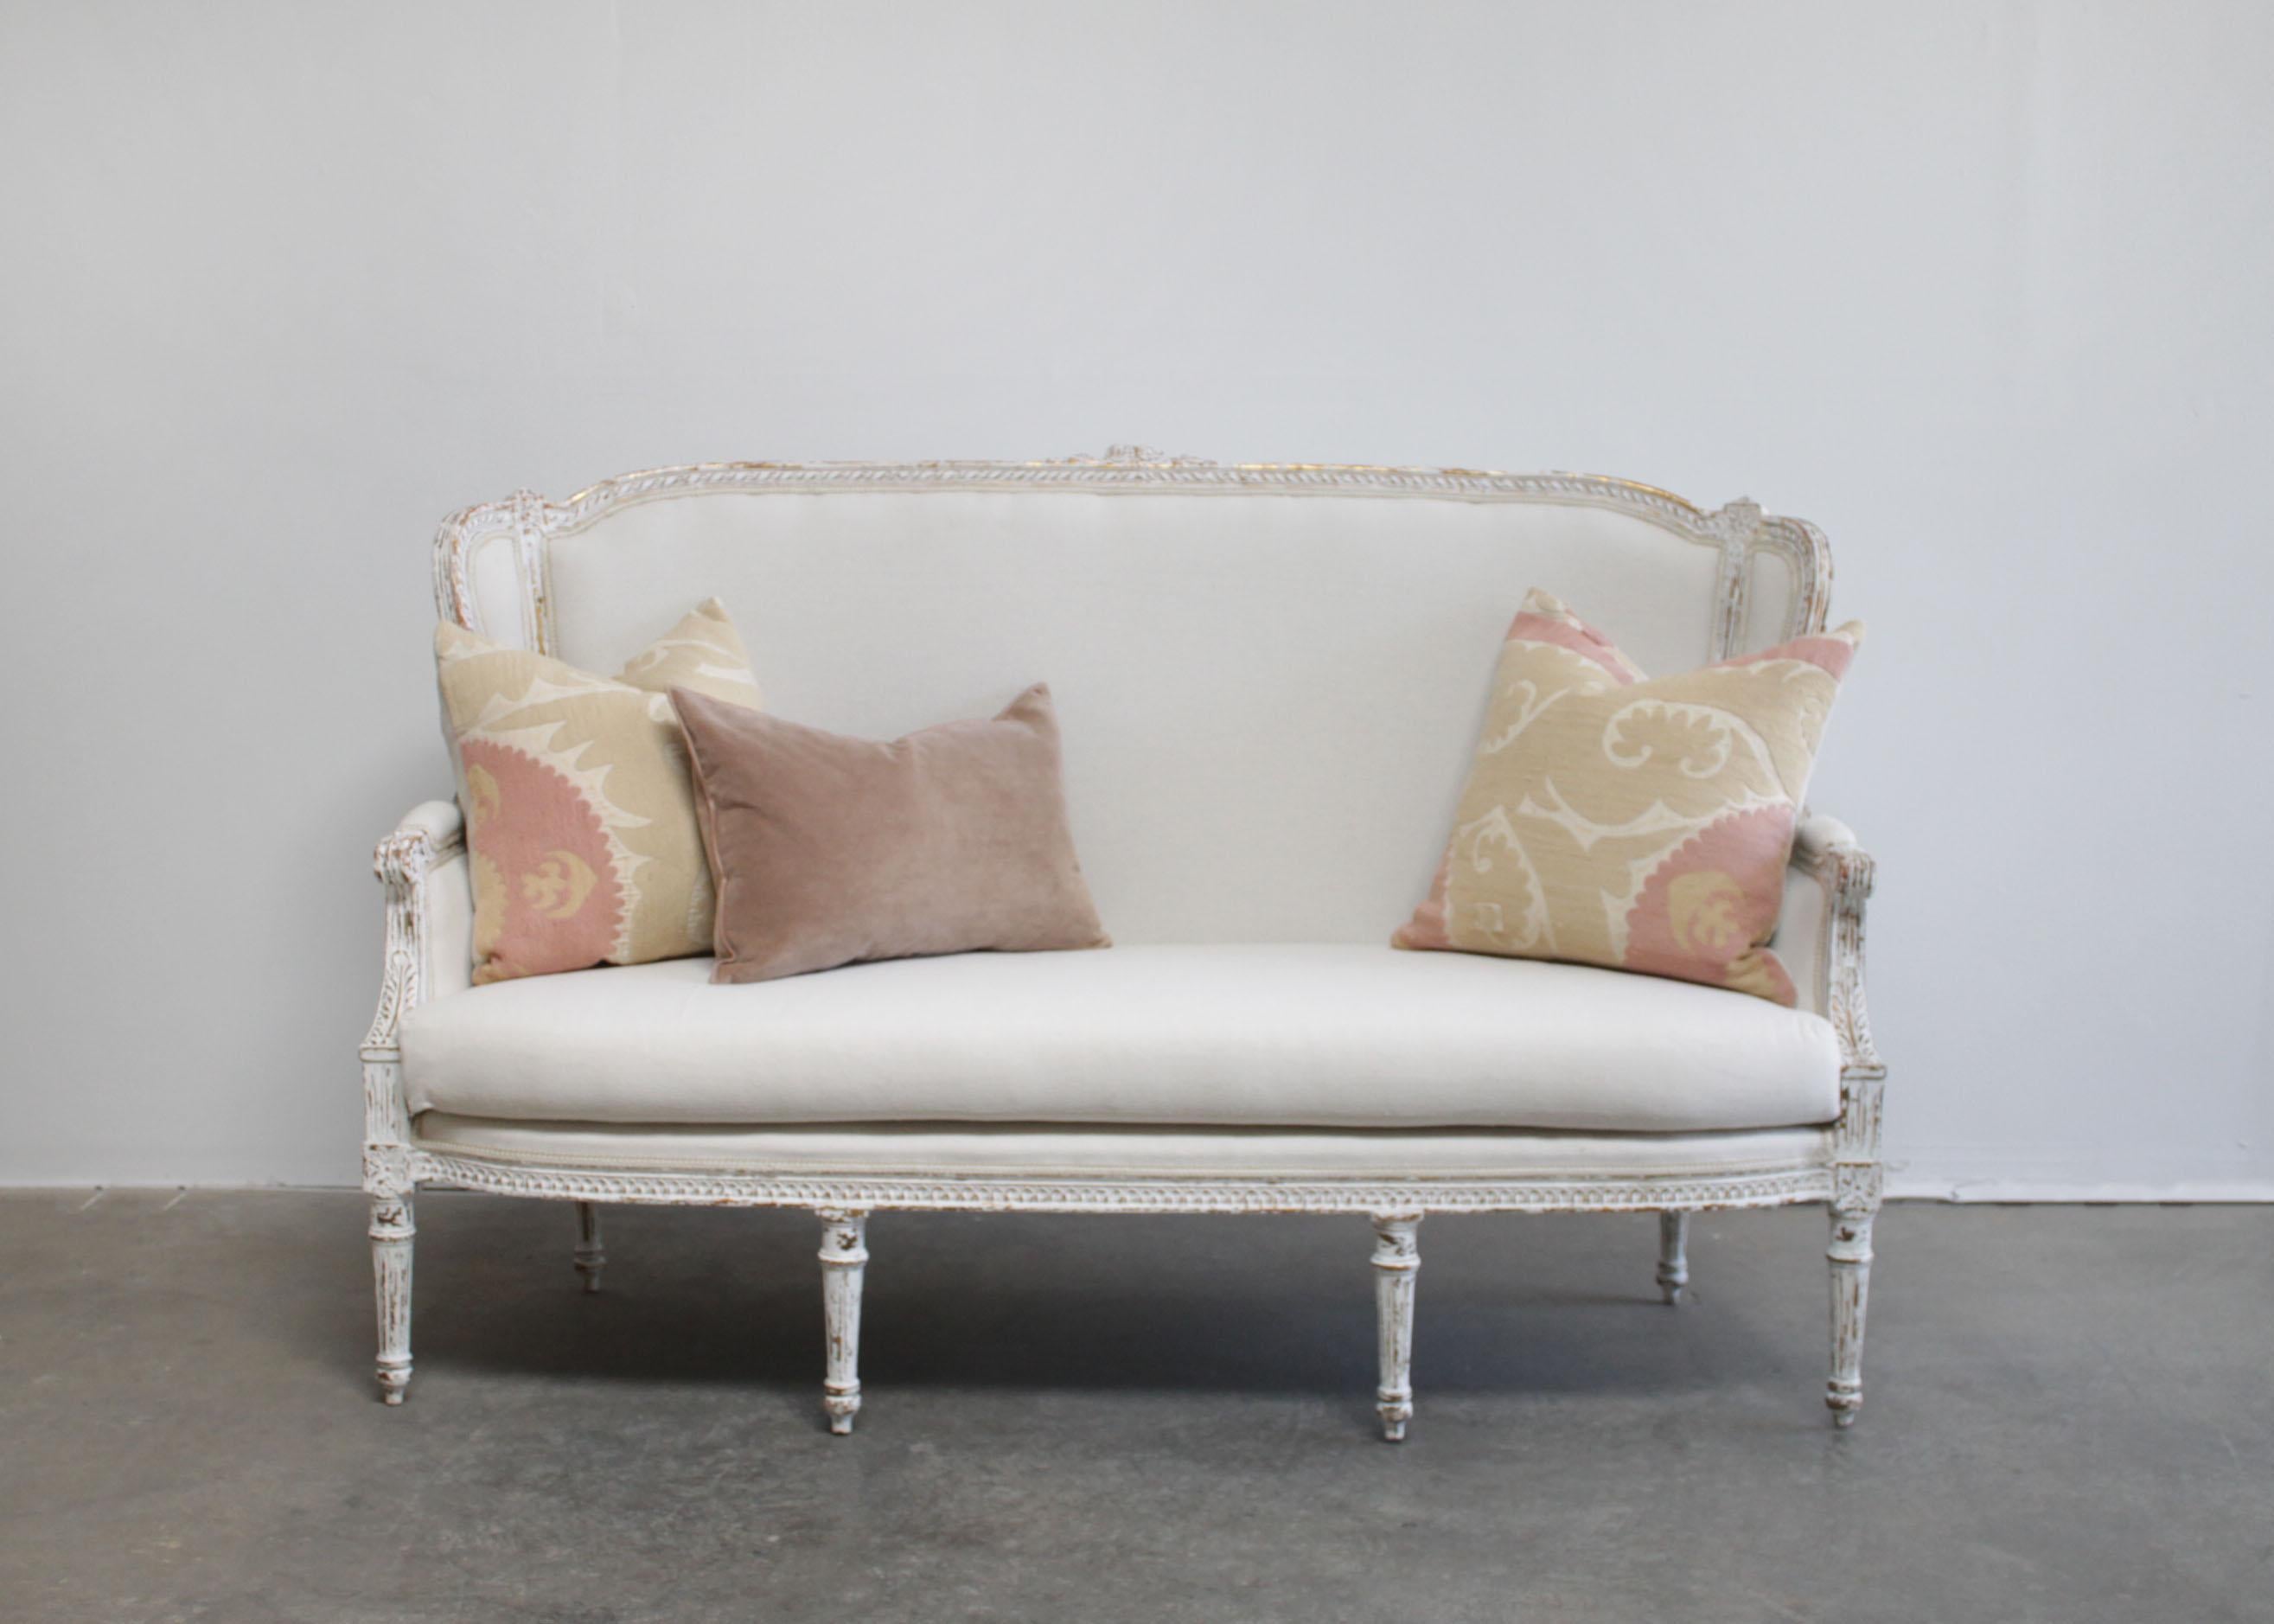 Vintage painted and upholstered Louis XVI style sofa settee
Painted in a french white with subtle distressed edges, where gilt and wood show through.
Classic fluted legs, with a medallion carving, and large flower carving at 
the top back of the